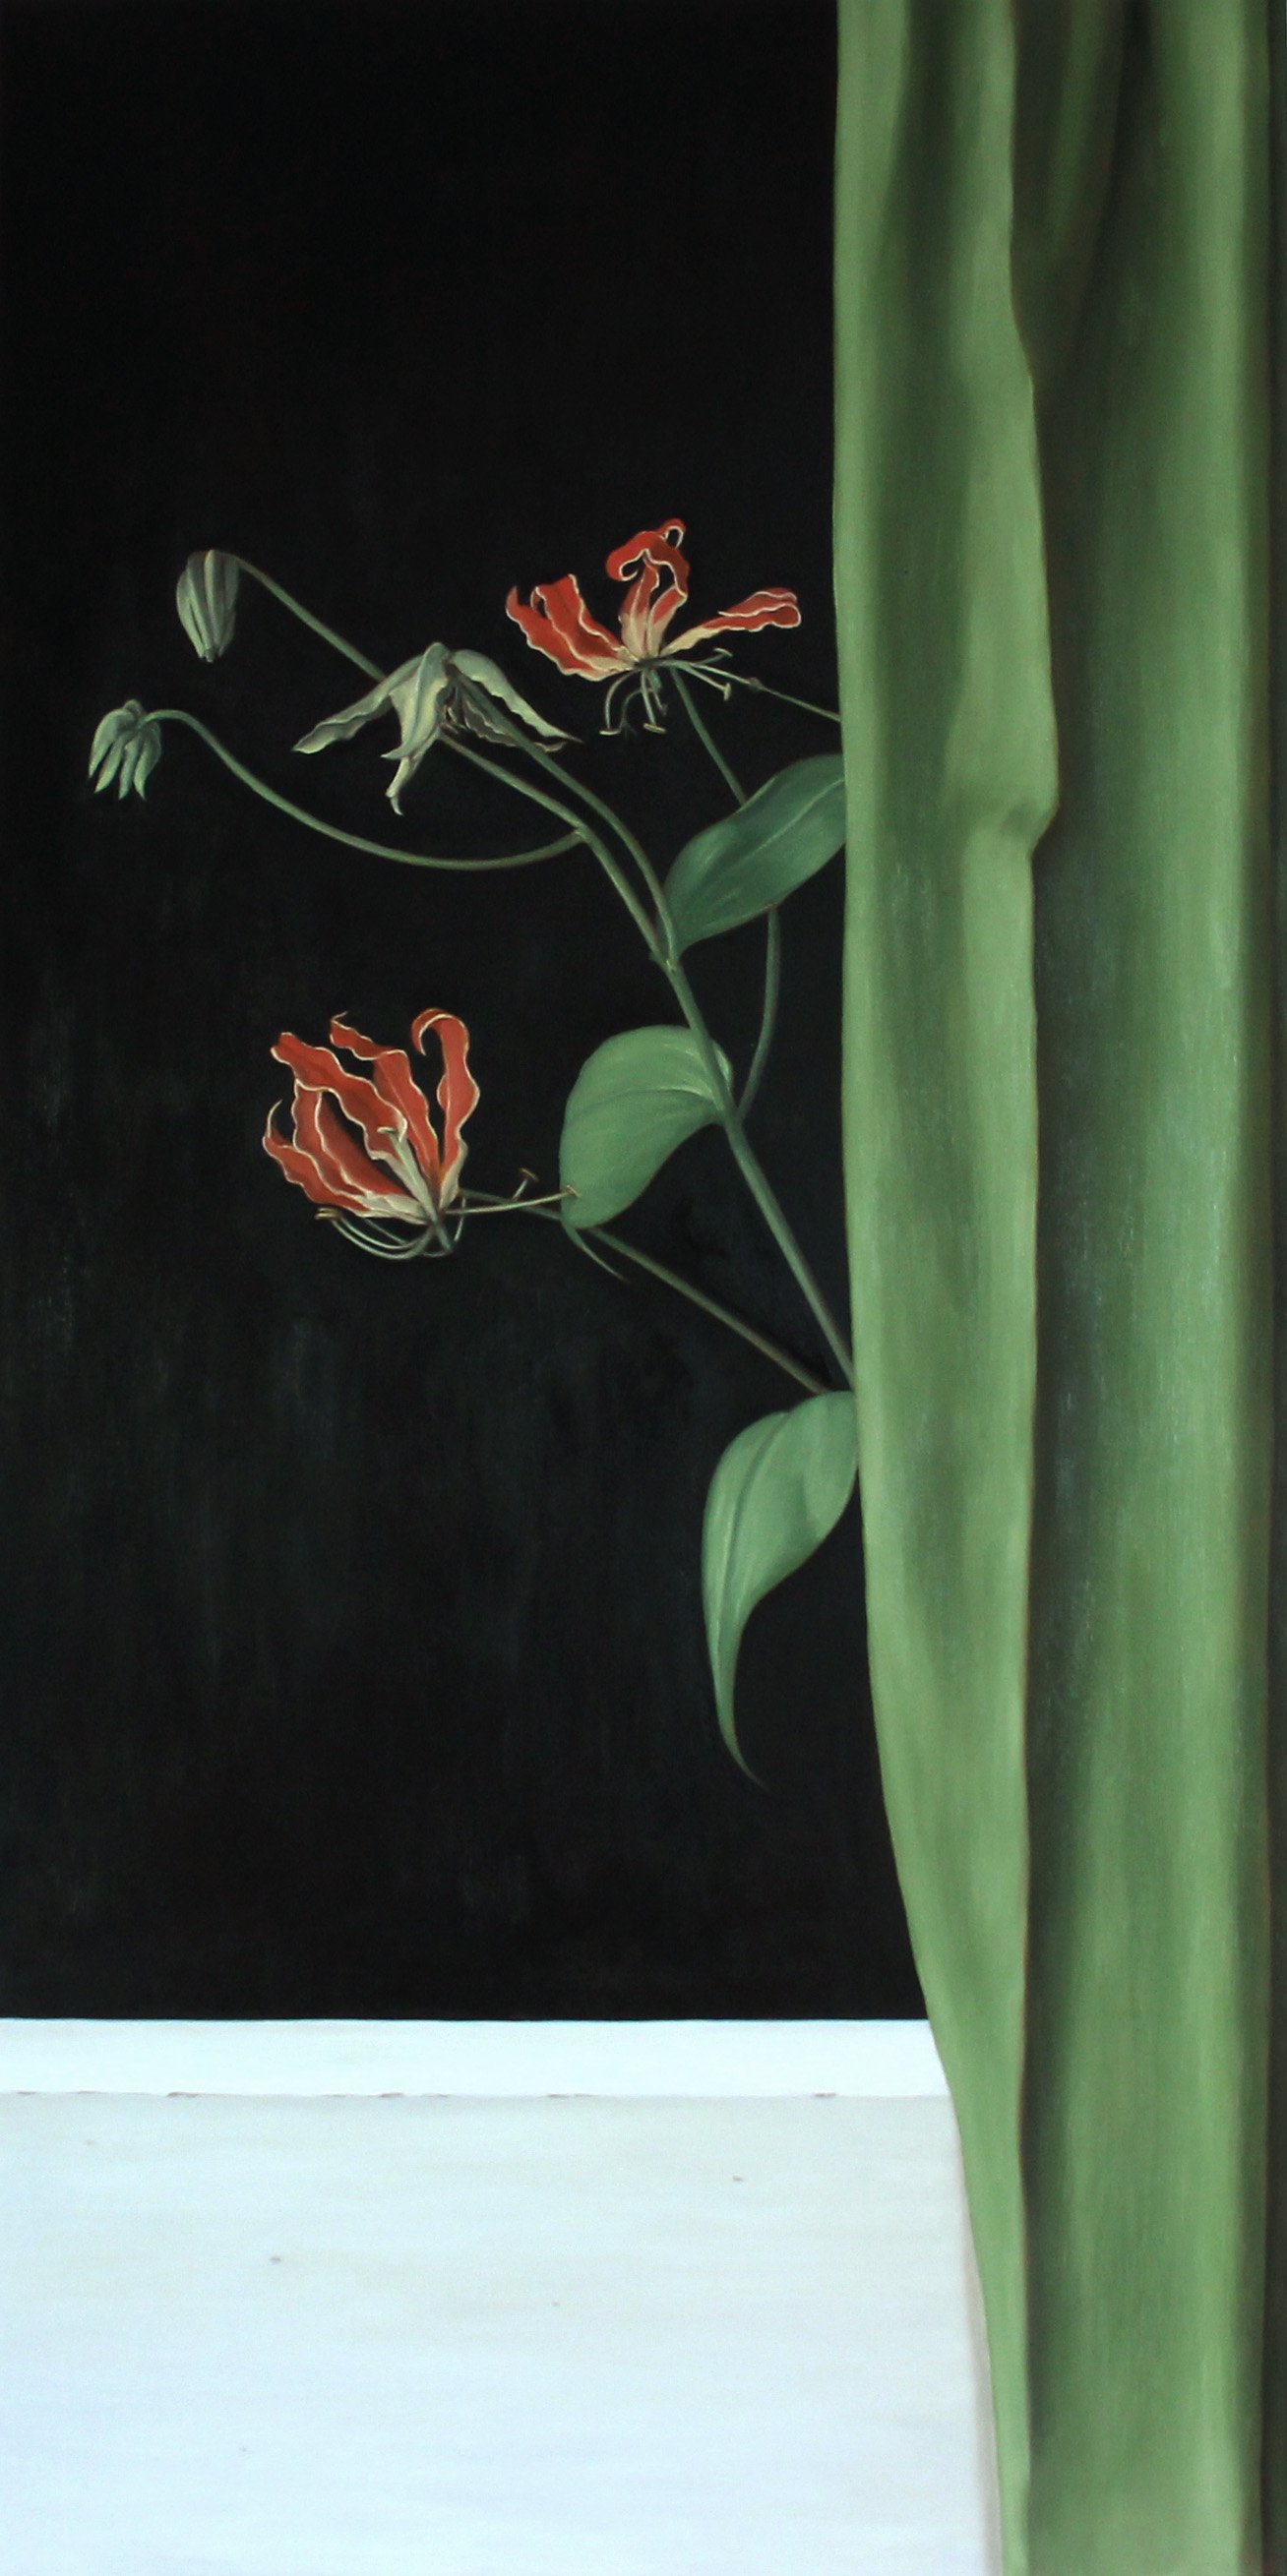 Flame Lily, 2023. Oil on aluminum panel. 120 x 60 cm.